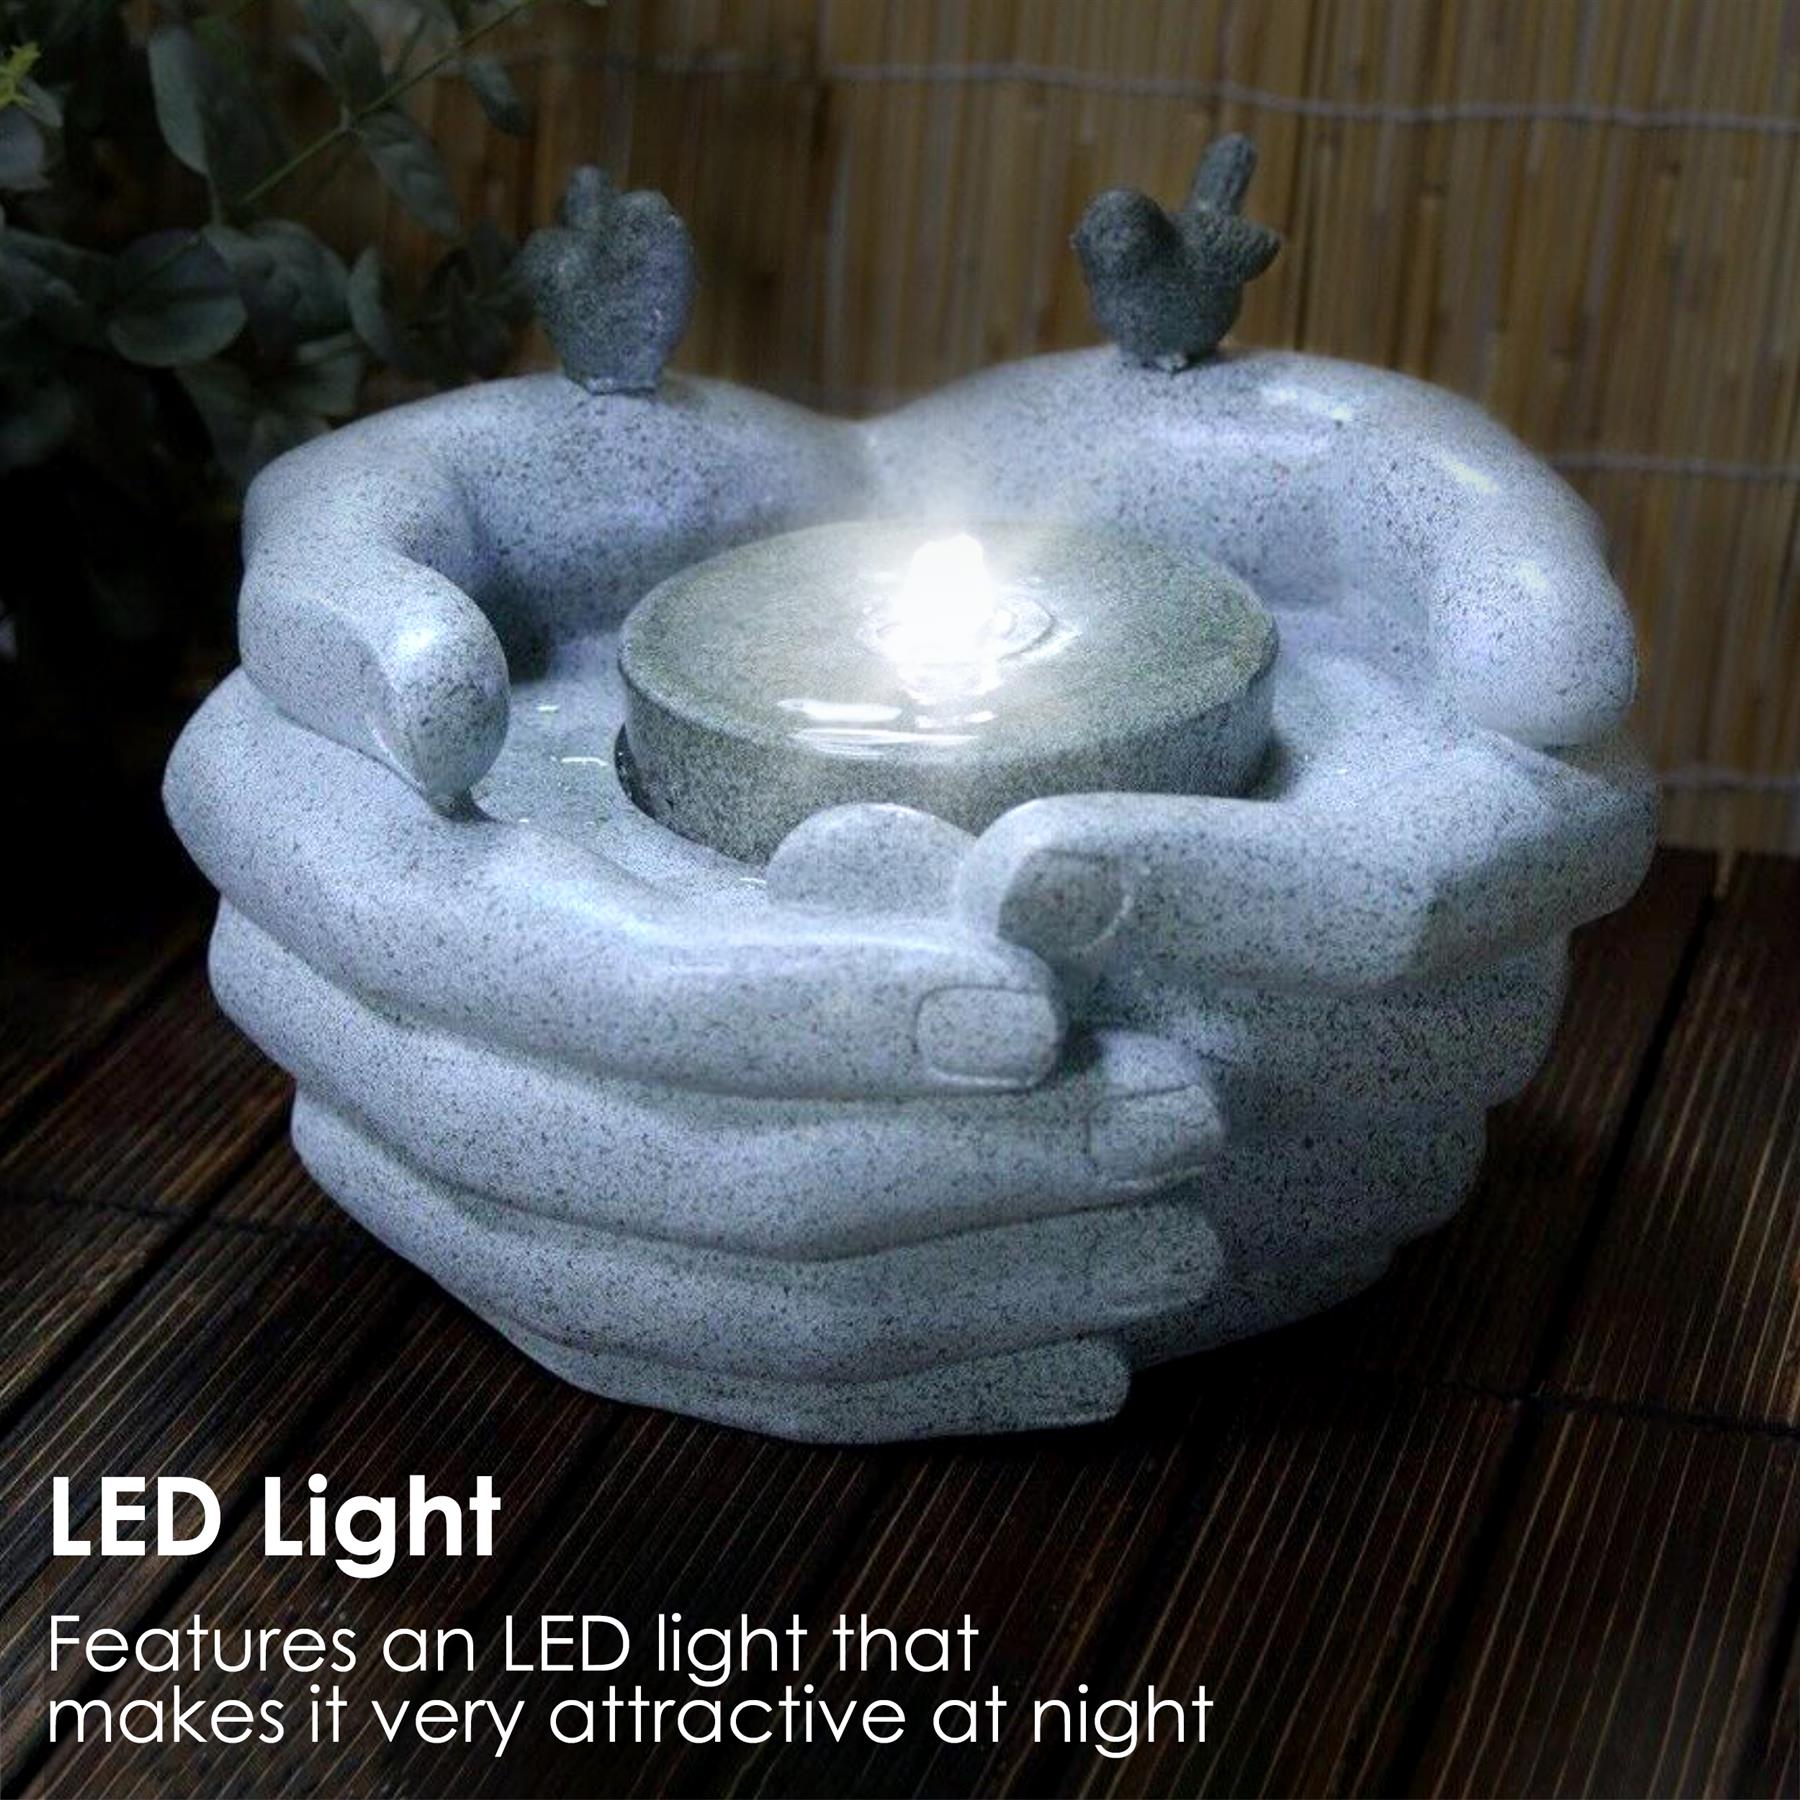 Cupped Hands LED Fountain Indoor Outdoor by GEEZY - The Magic Toy Shop